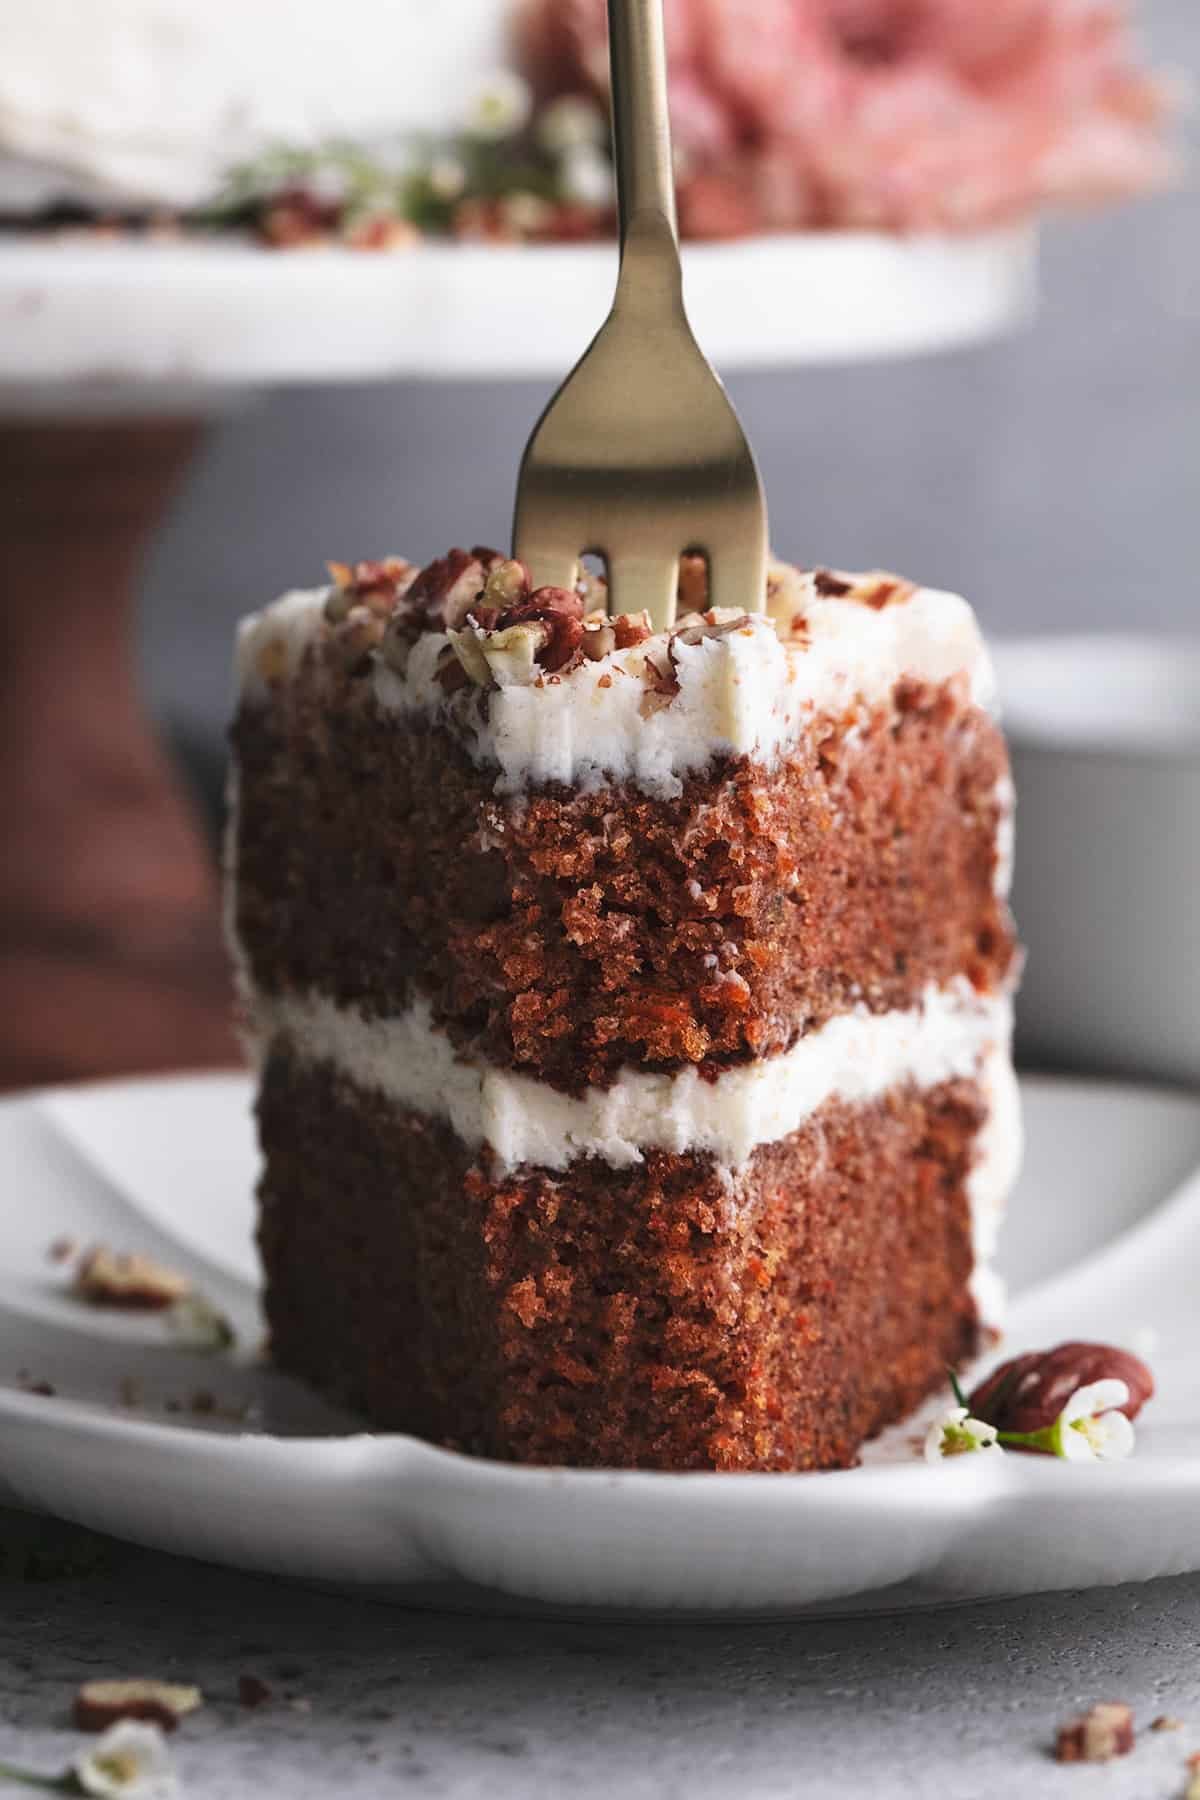 fork cutting into slice of carrot cake on a plate